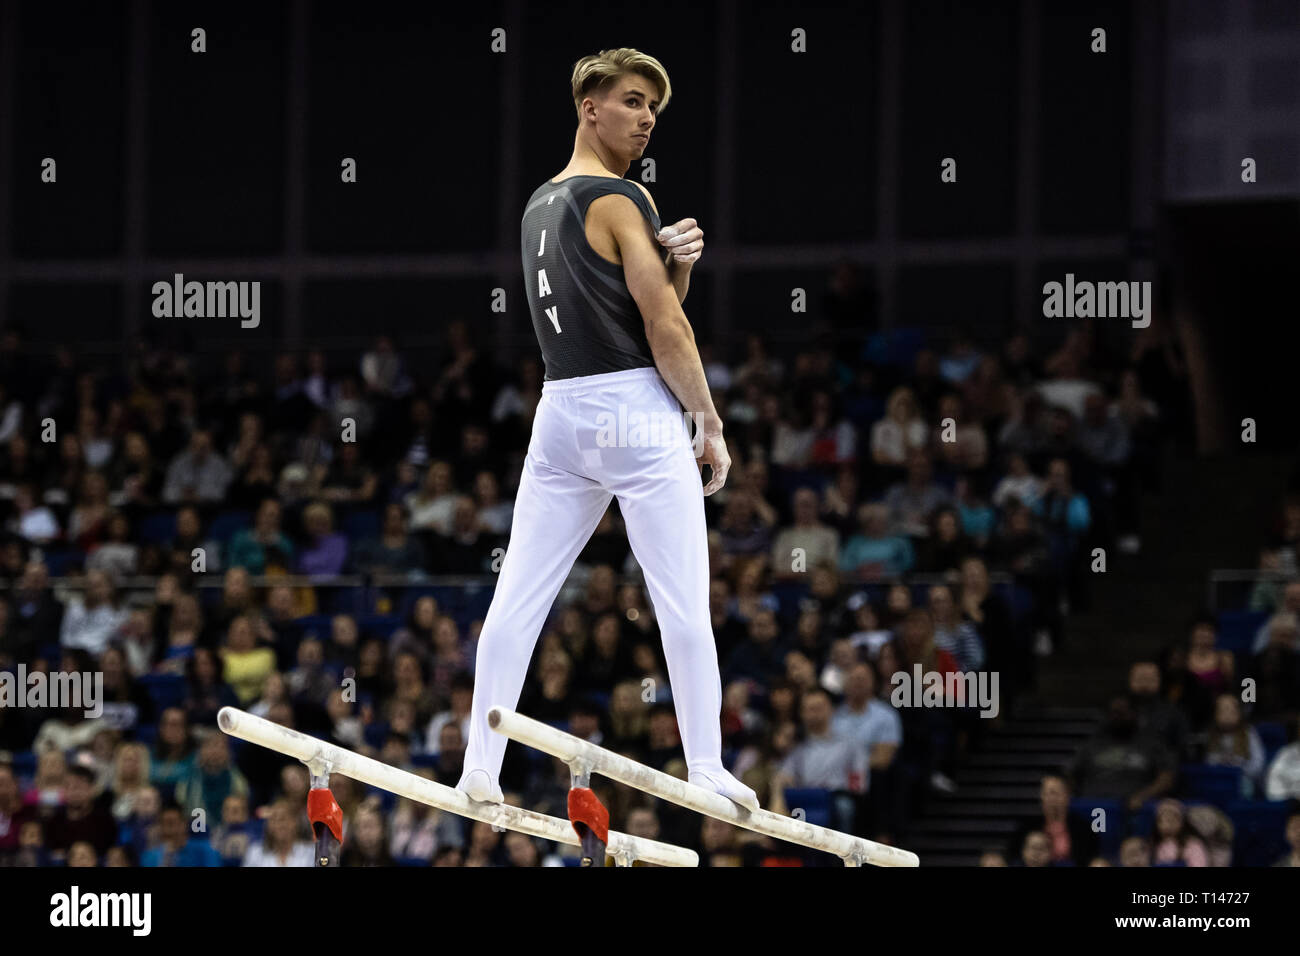 London, UK. 23rd March, 2019. Jay Thompson during the Matchroom Multisport presents the 2019 Superstars of Gymnastics at The O2 Arena on Saturday, 23 March 2019. LONDON ENGLAND. Credit: Taka G Wu/Alamy News Stock Photo